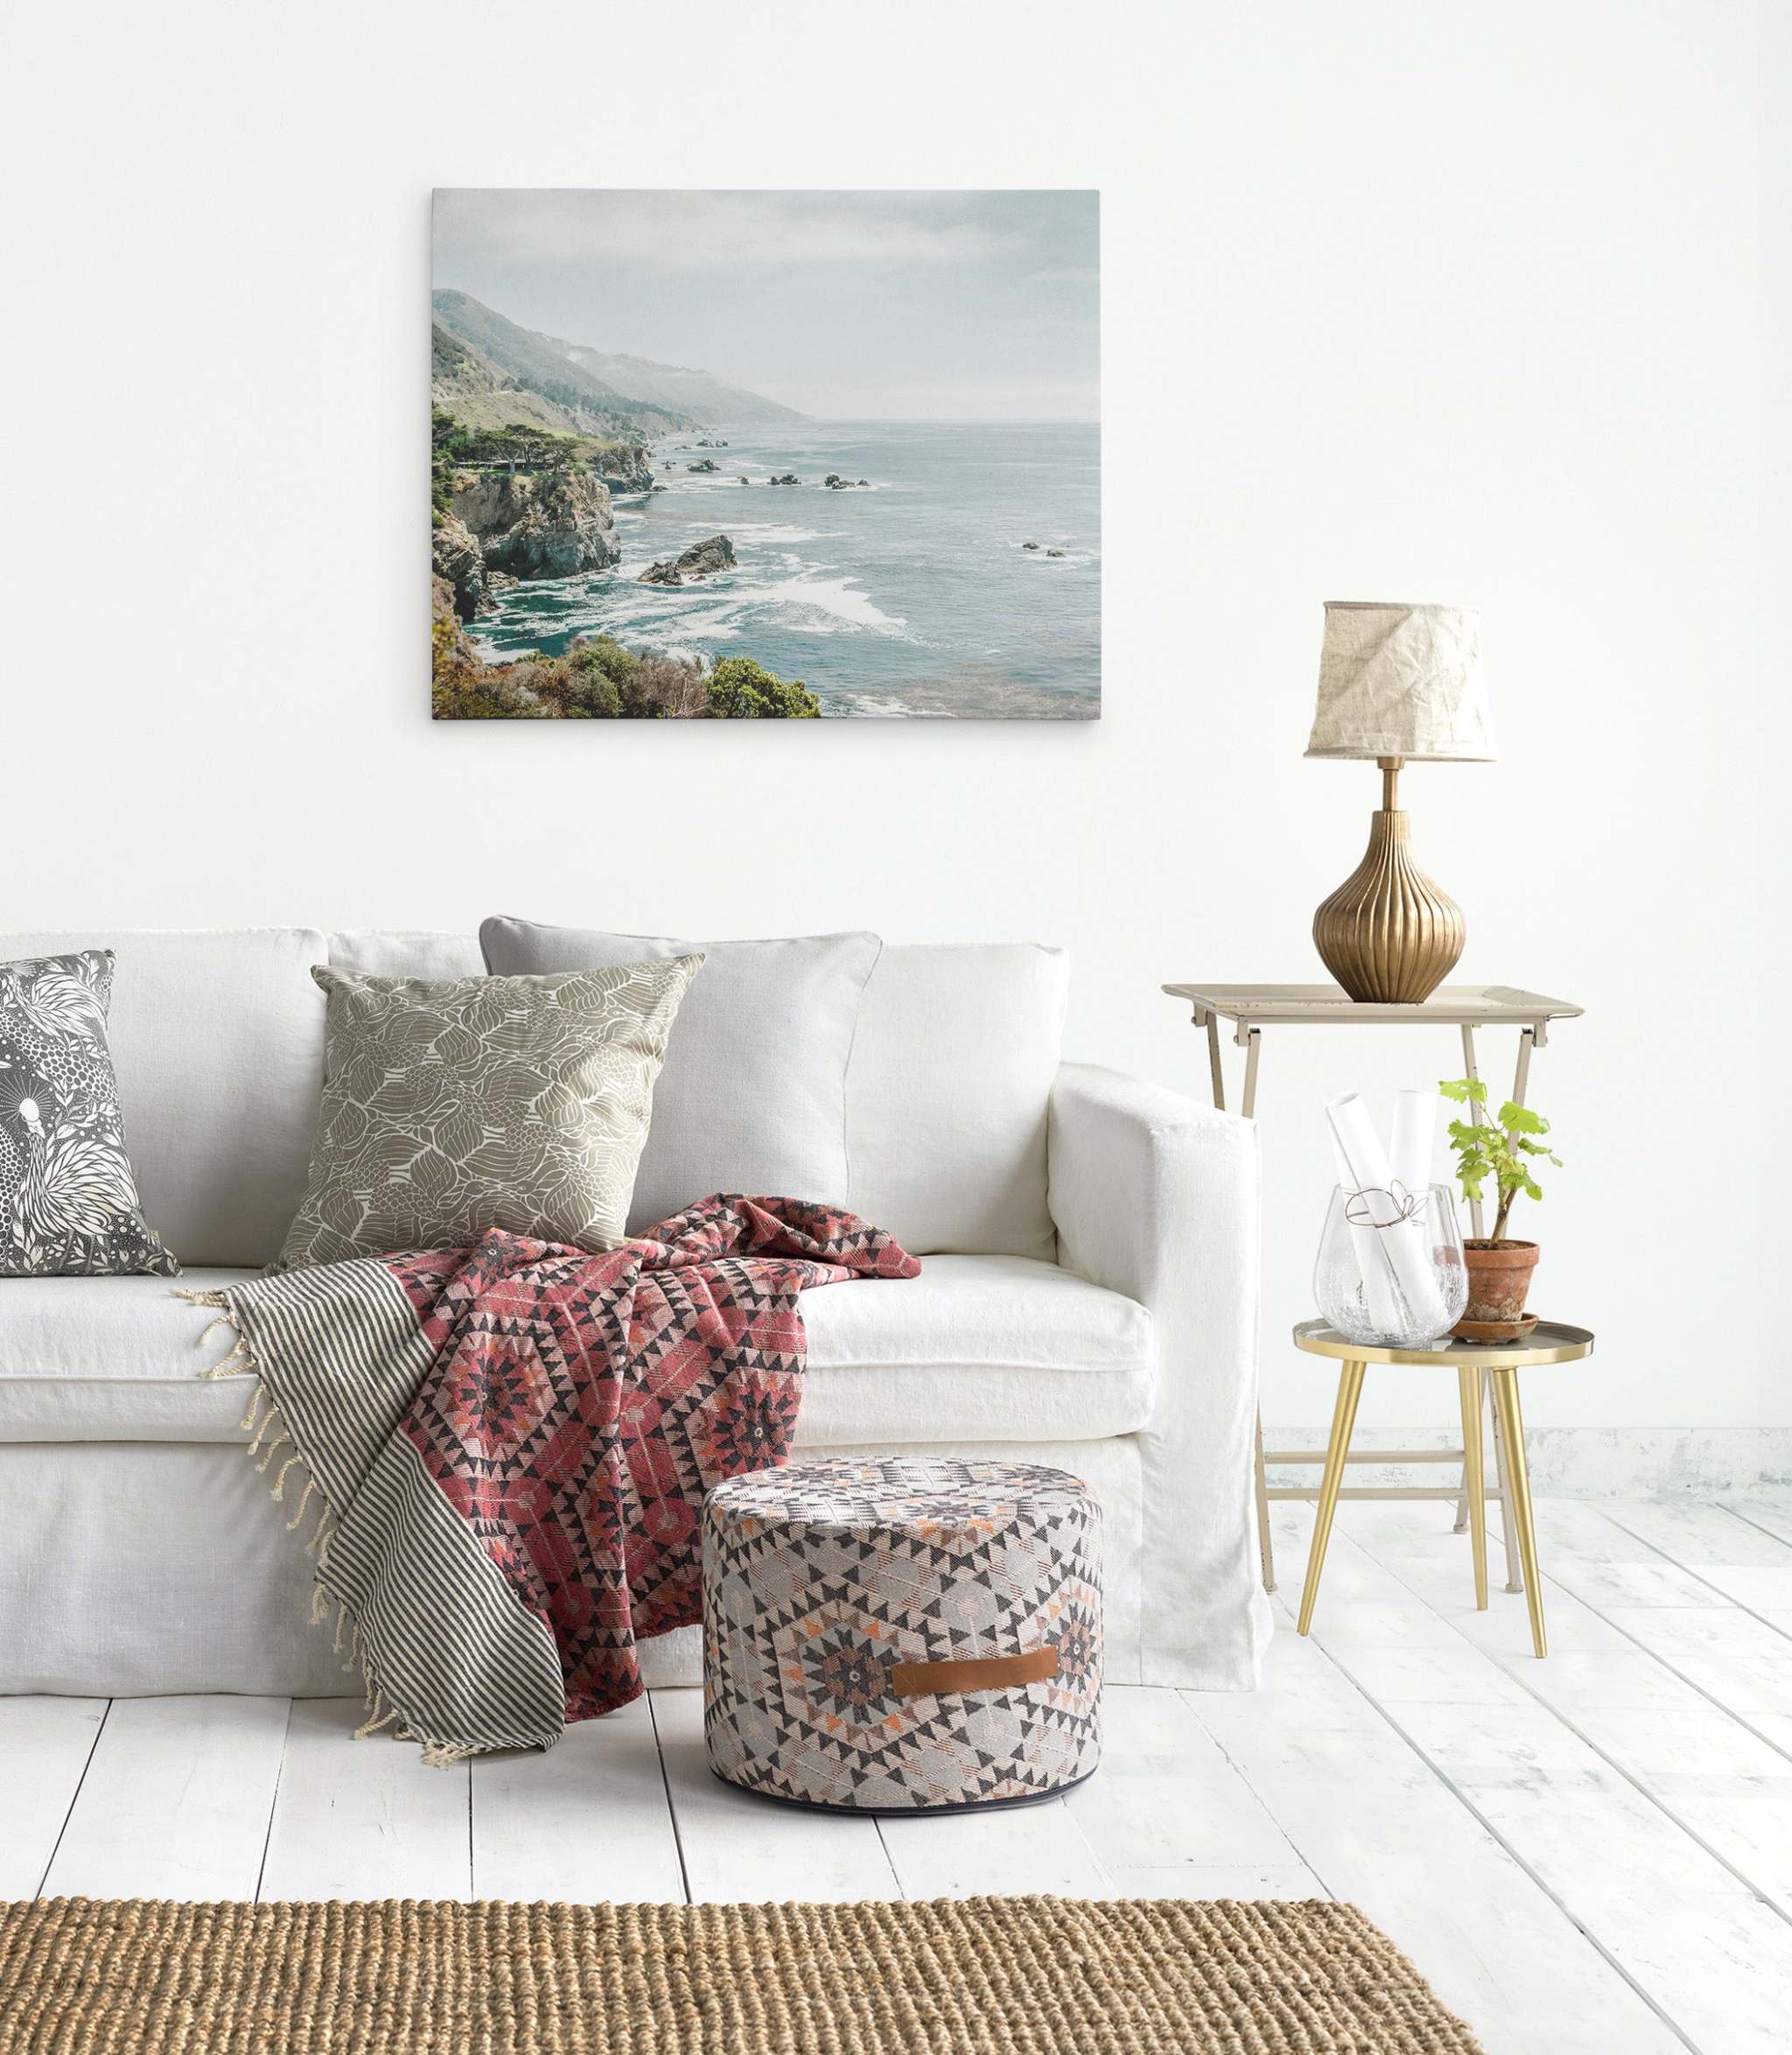 A cozy living room with a white sofa adorned with patterned pillows, a red and pink patterned blanket, and a matching pouf. A side table holds a lamp and a potted plant. A serene Big Sur Landscape Canvas Wall Art, 'Rocky Rocks' by Offley Green hangs on the wall above the sofa. The floor is white wood.